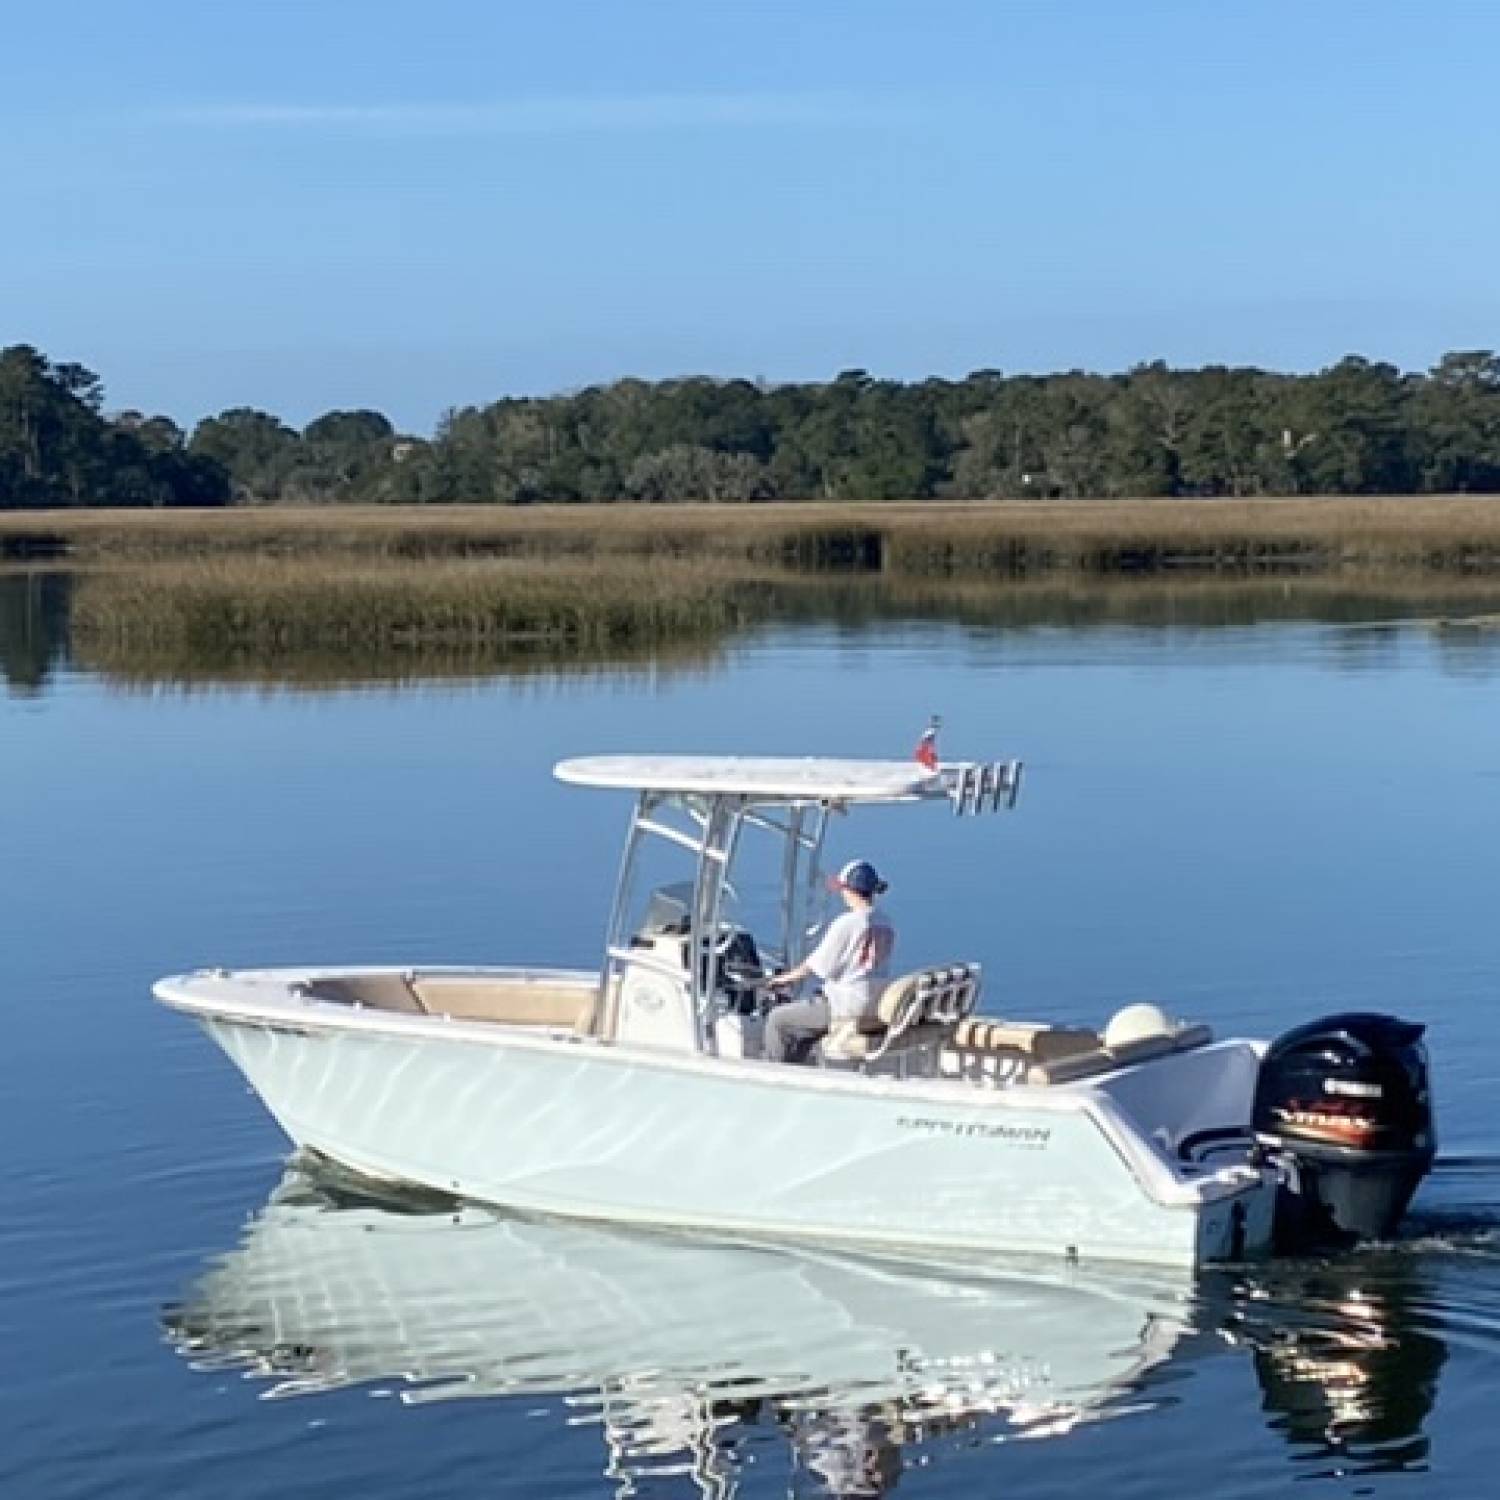 Title: If she could drive it back to Wofford, she would! - On board their Sportsman Heritage 231 Center Console - Location: Store Creek Edisto Island SC. Participating in the Photo Contest #SportsmanJanuary2022